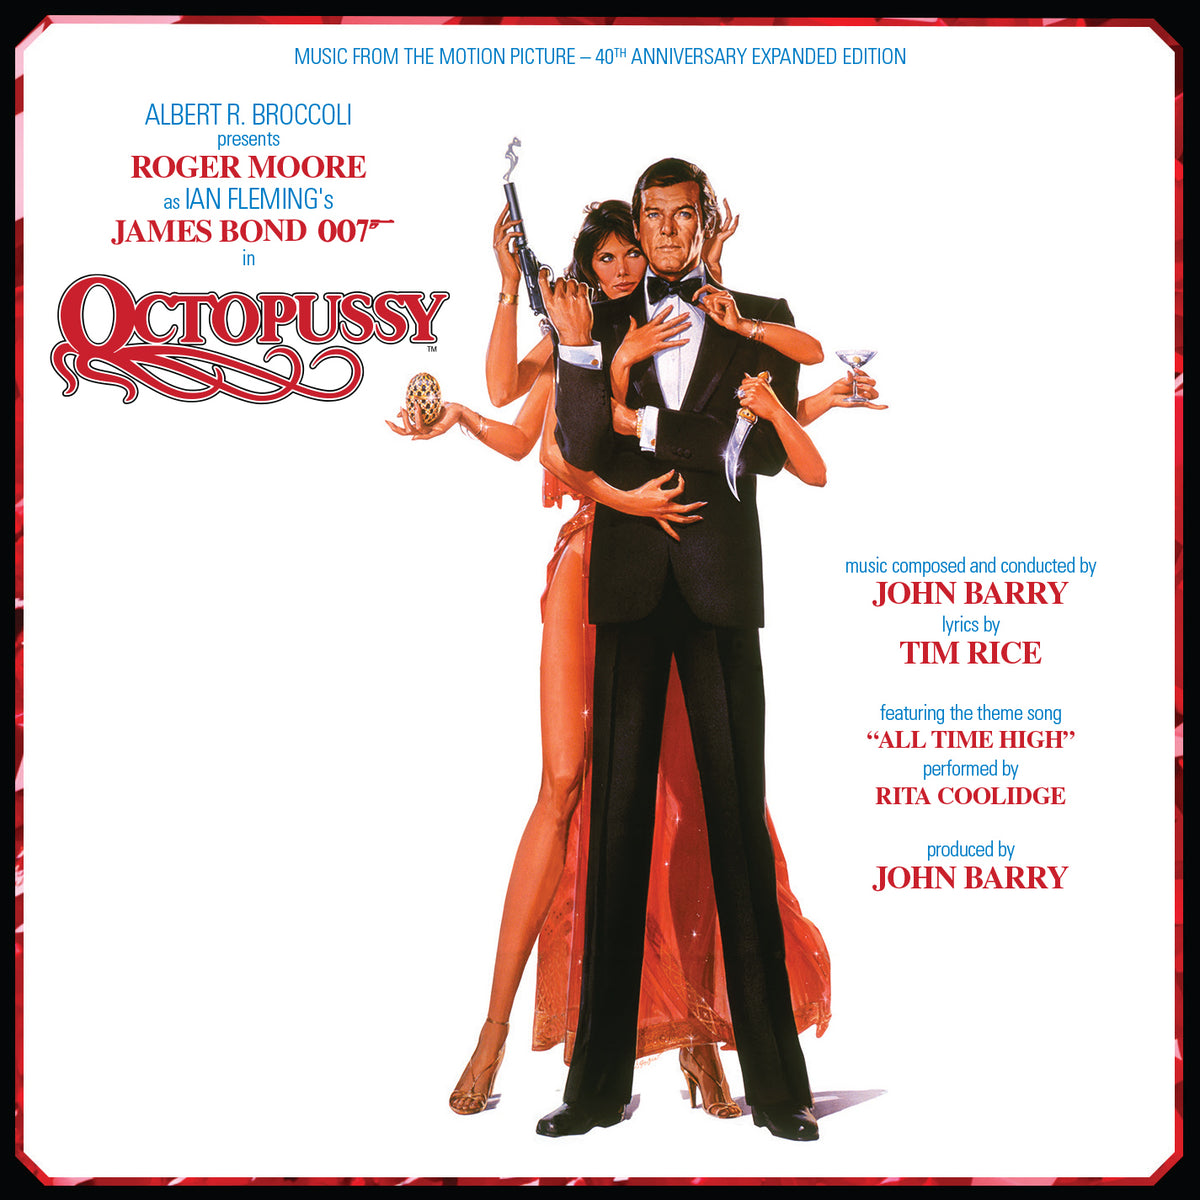 James Bond Octopussy Soundtrack Double CD Set - 40th Anniversary Expanded Remastered Edition